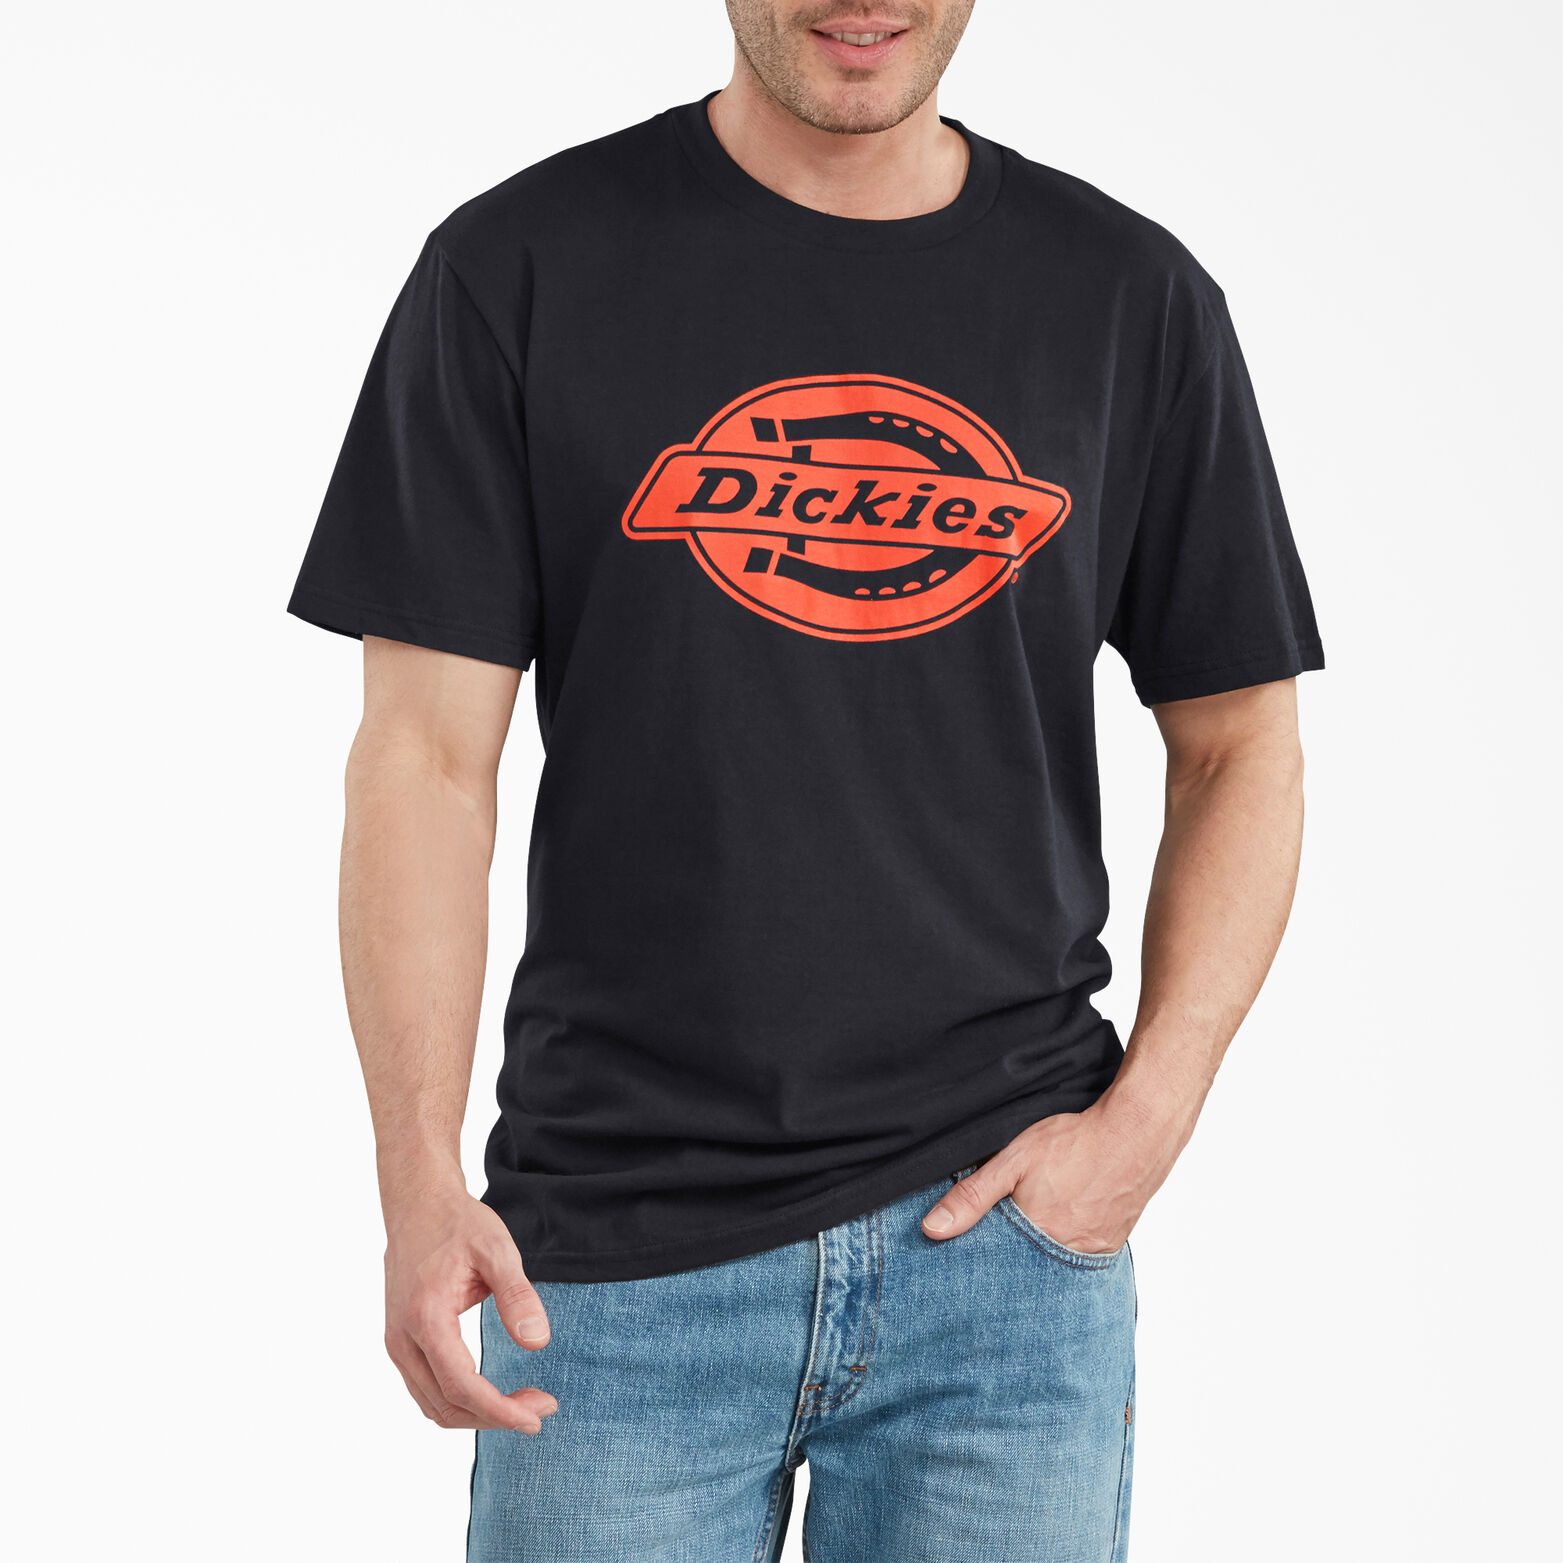 Short Sleeve Relaxed Fit Graphic T-Shirt - Dickies US, Black